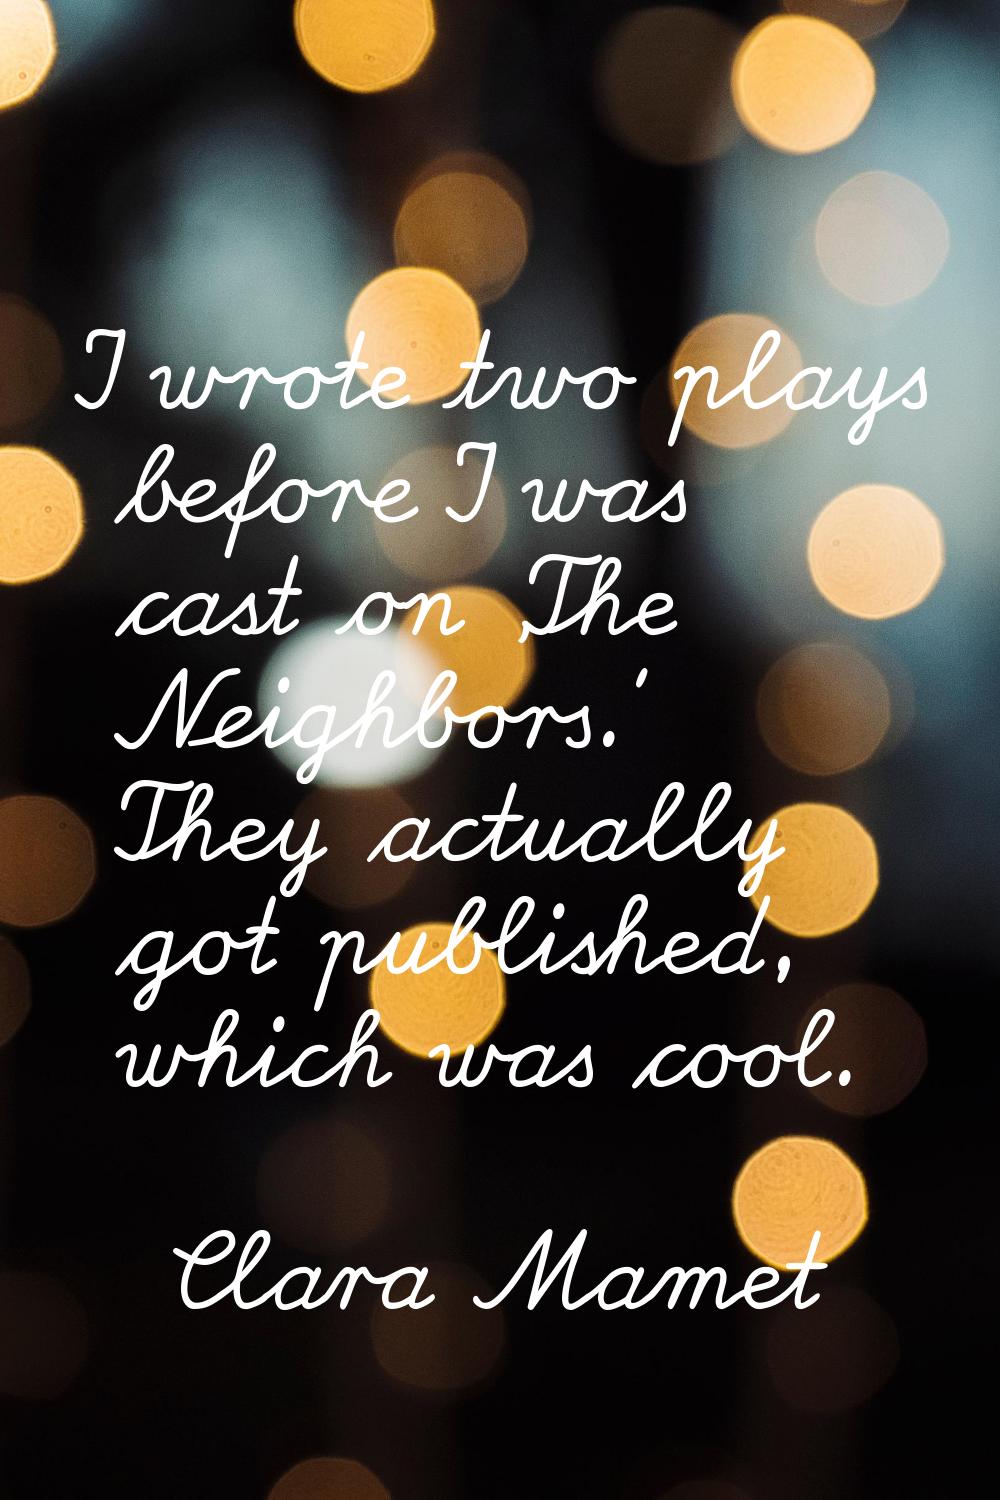 I wrote two plays before I was cast on 'The Neighbors.' They actually got published, which was cool